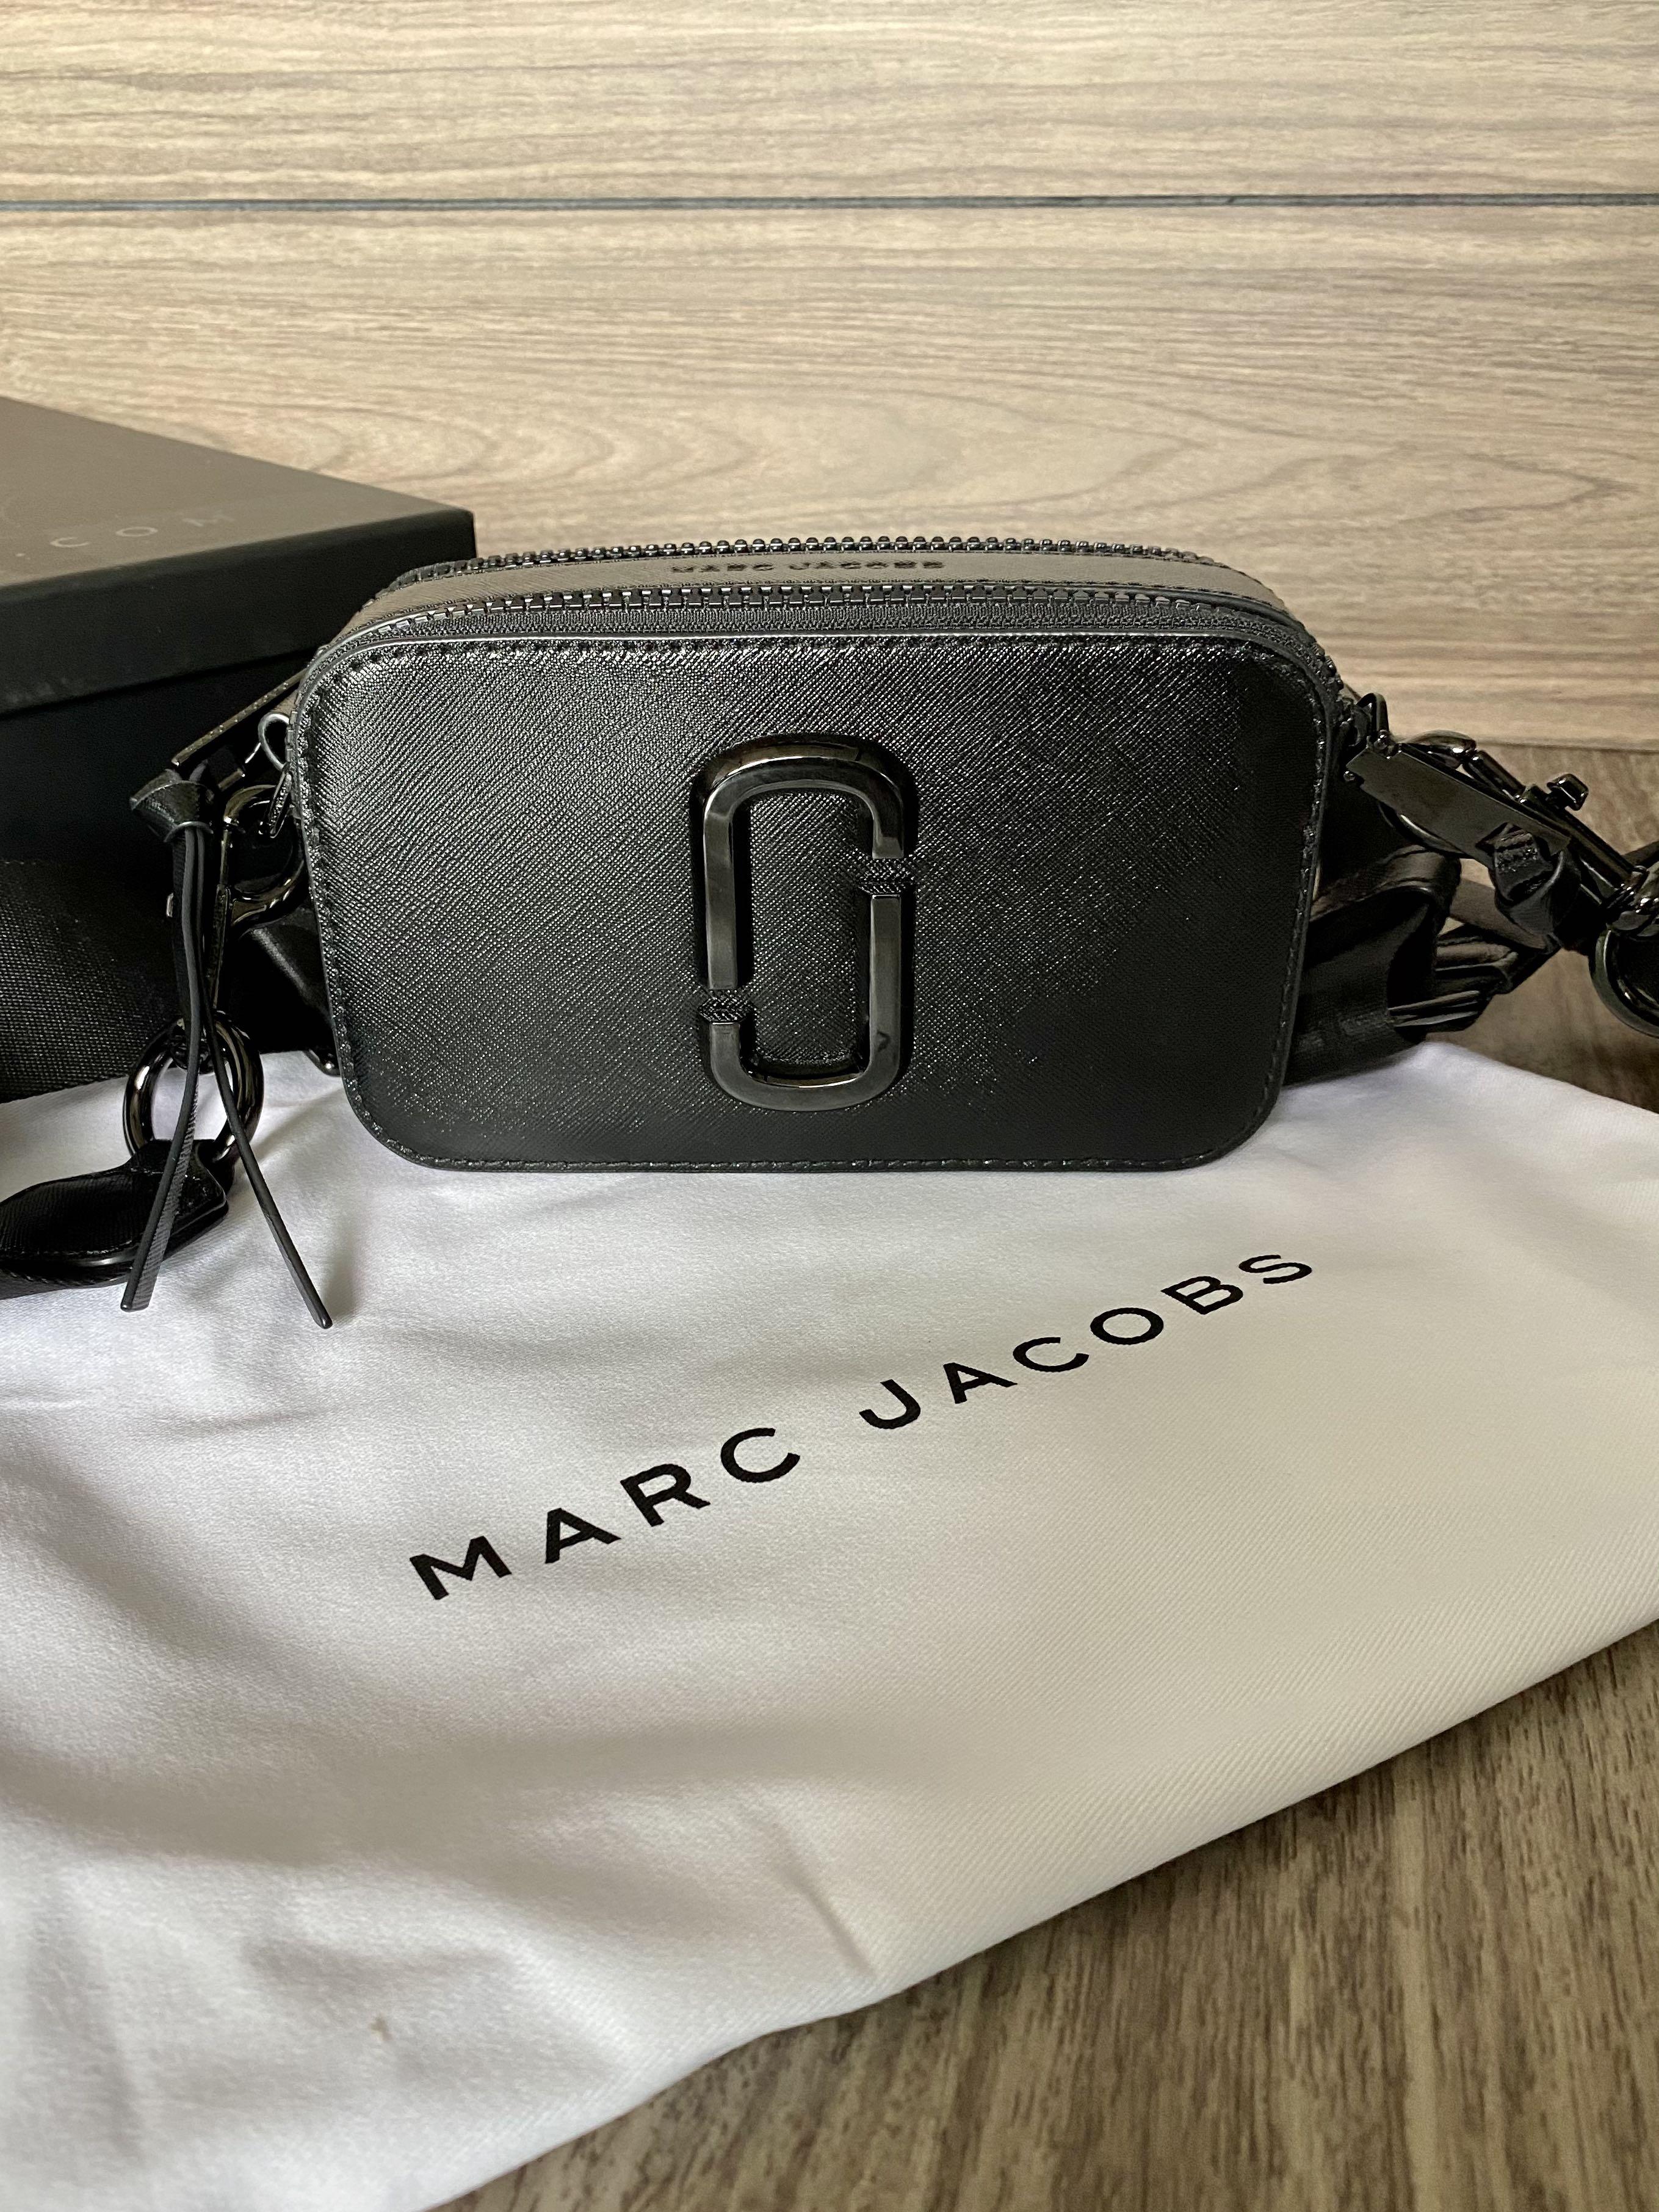 Marc Jacobs L97407 Black Snapshot DTM Small Camera Bag Size 7.5x4.5x2.5 in